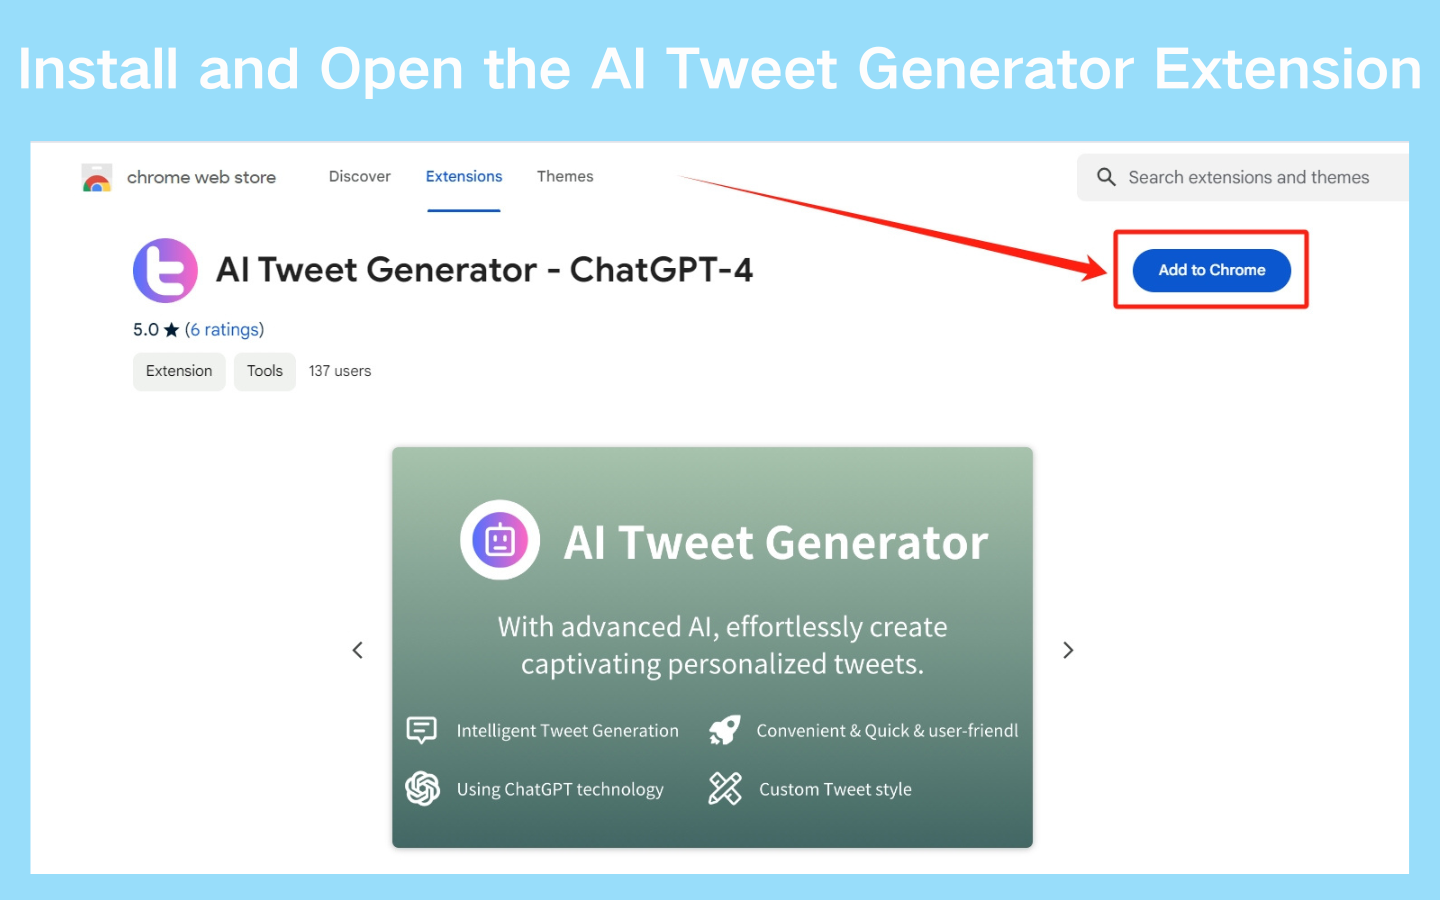  Step 1: Install and Open the AI Tweet Generator Extension 